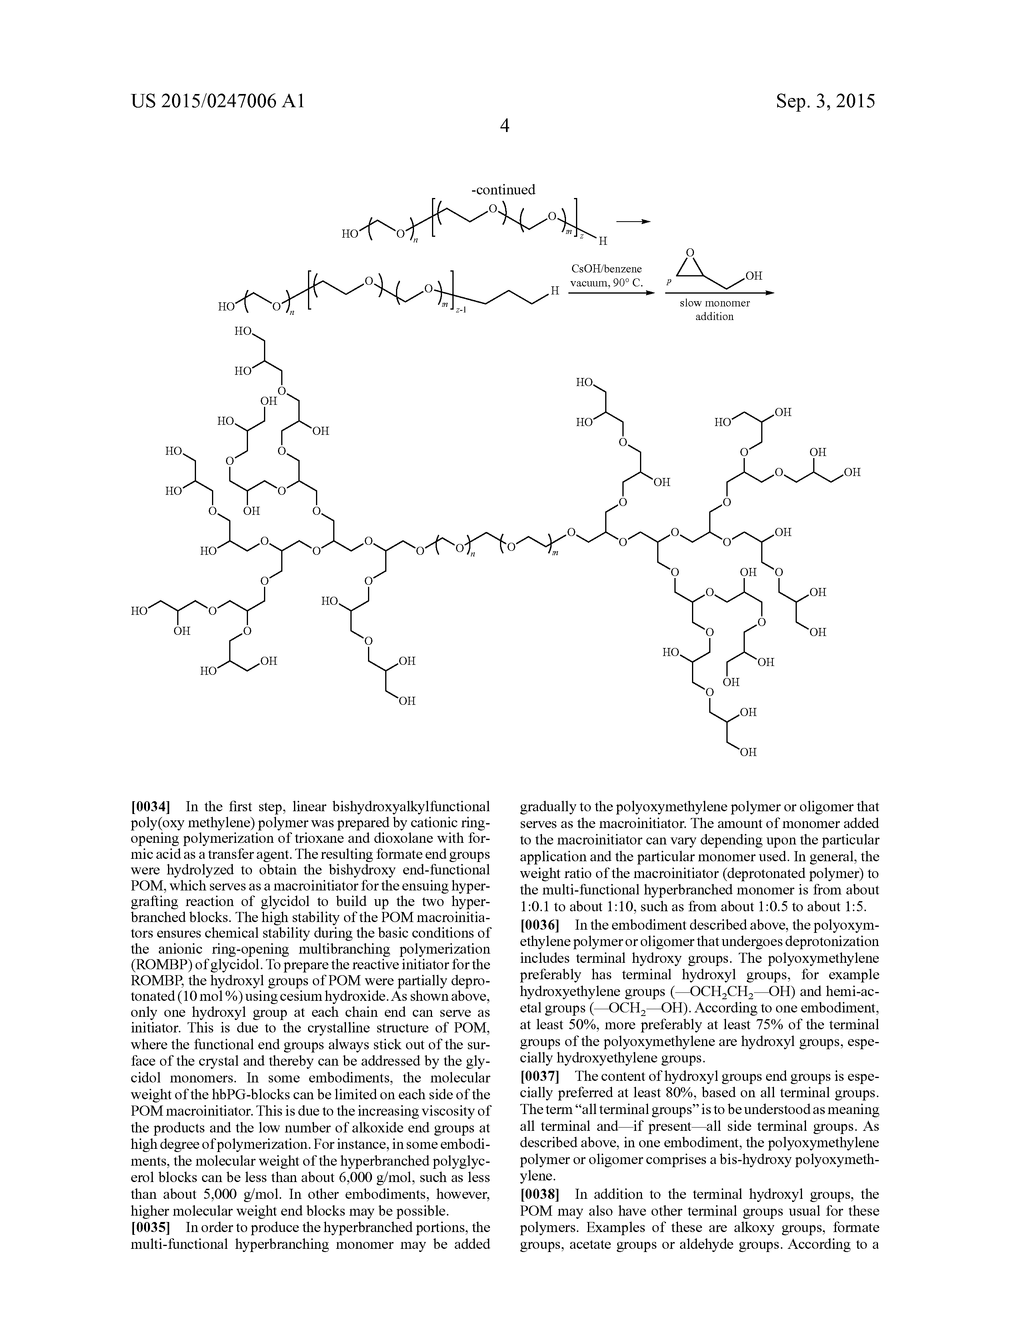 Block Copolymers Based on Linear Poly(oxymethylene)(POM) and Hyperbranched     Poly(glycerol): Combining Polyacetals with Polyethers - diagram, schematic, and image 07